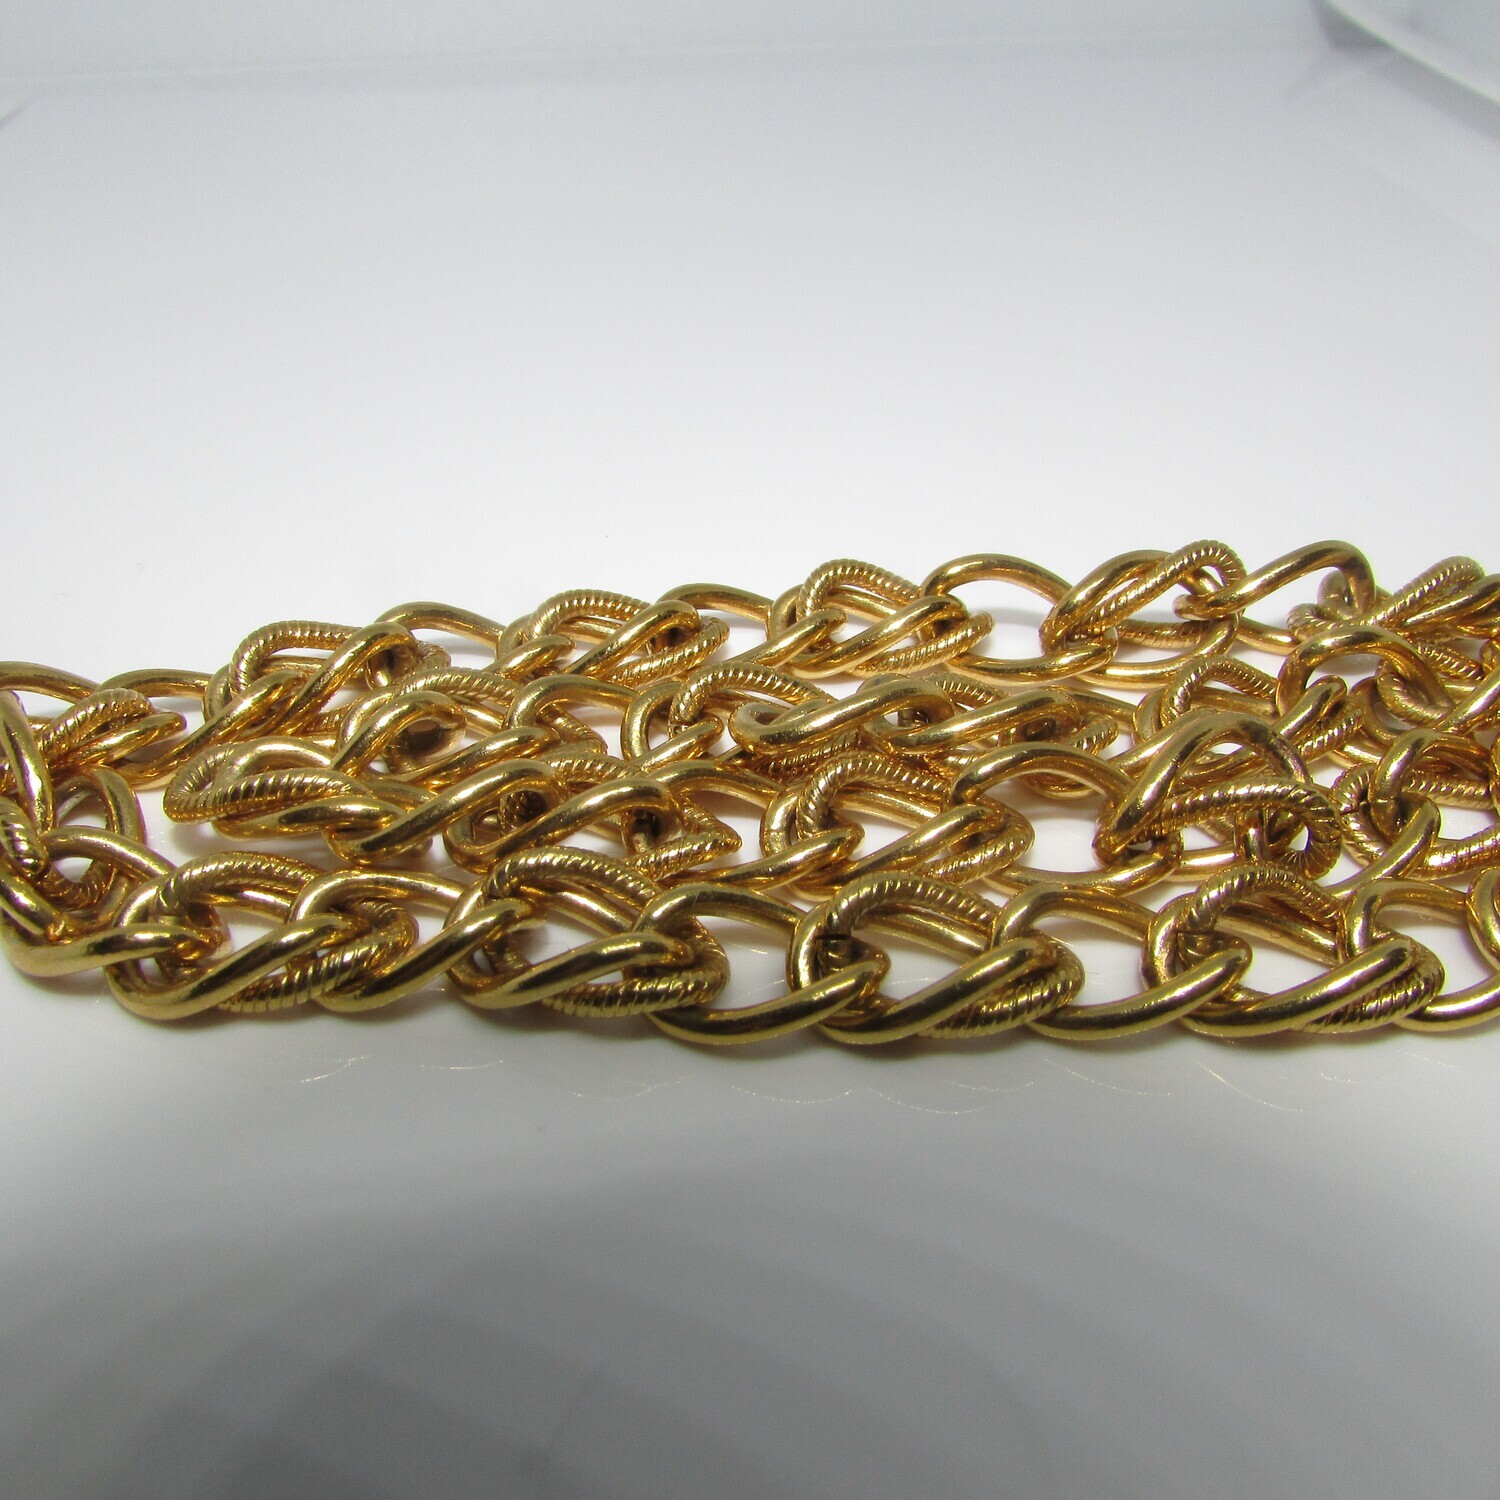 Monet's Gold Chunky Linked Chain c. 1970's